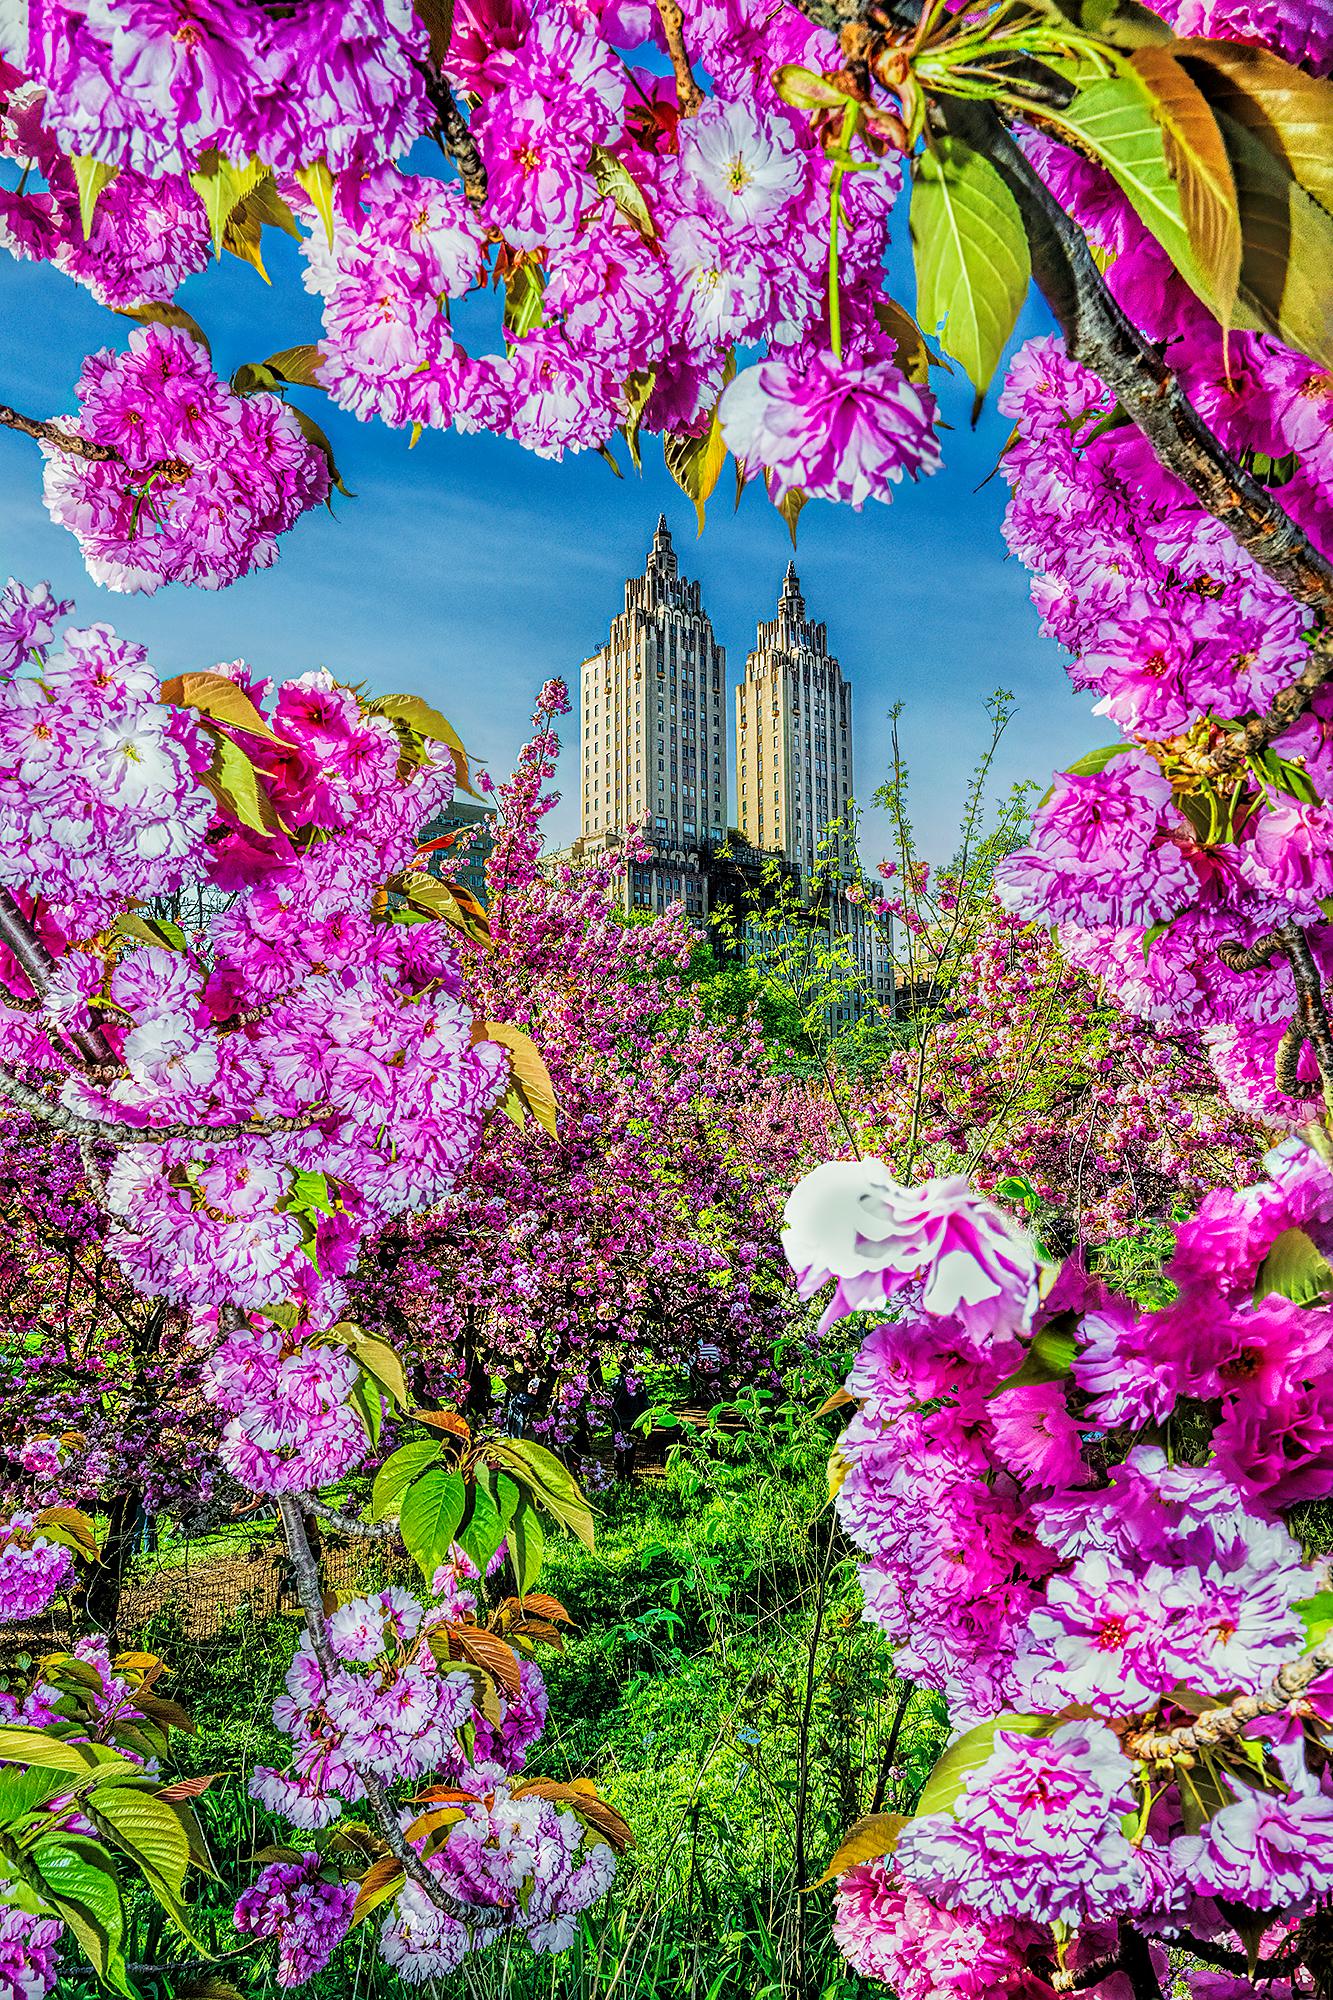 Mitchell Funk Color Photograph - The San Remo Central Park West Framed by Cherry Blossoms Flowers